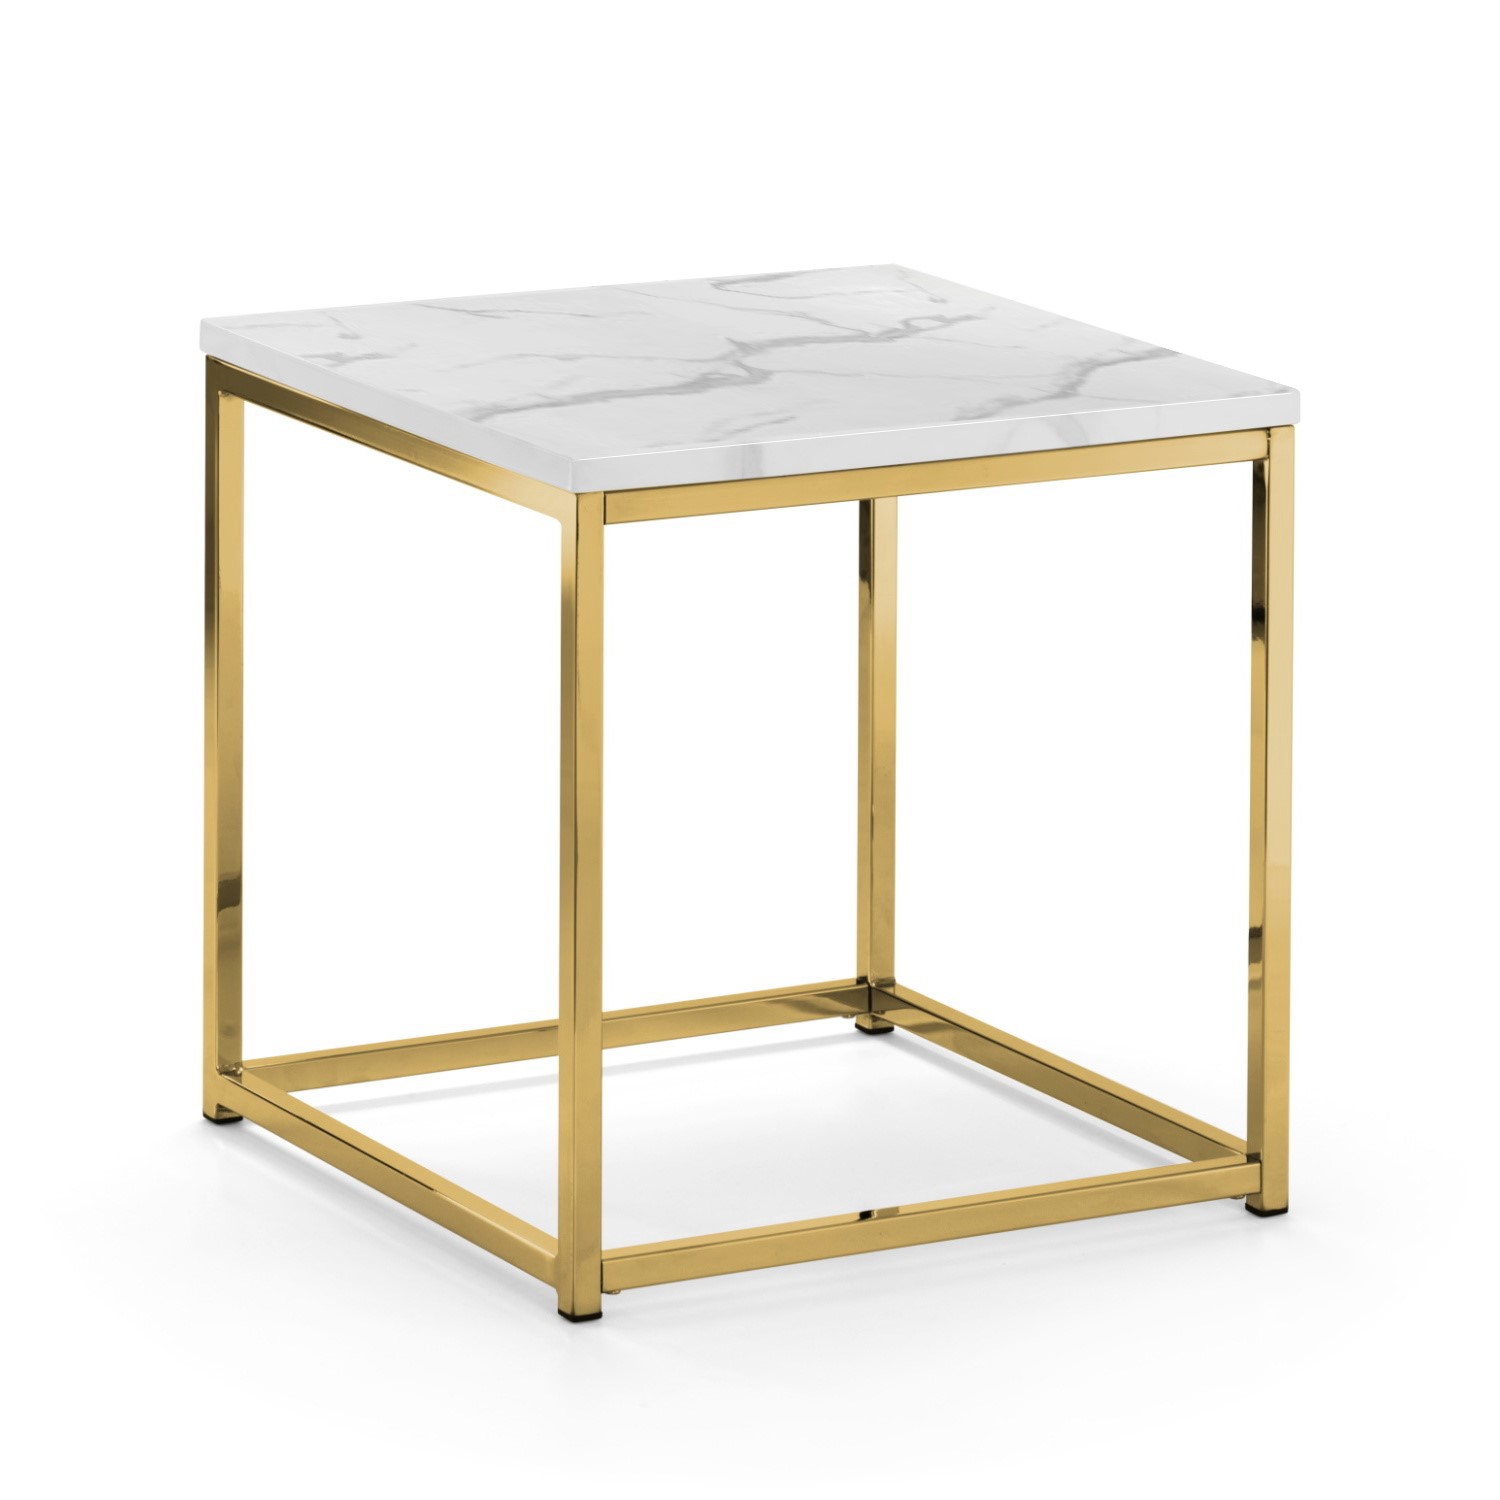 Photo of Marble top side table with gold legs - julian bowen